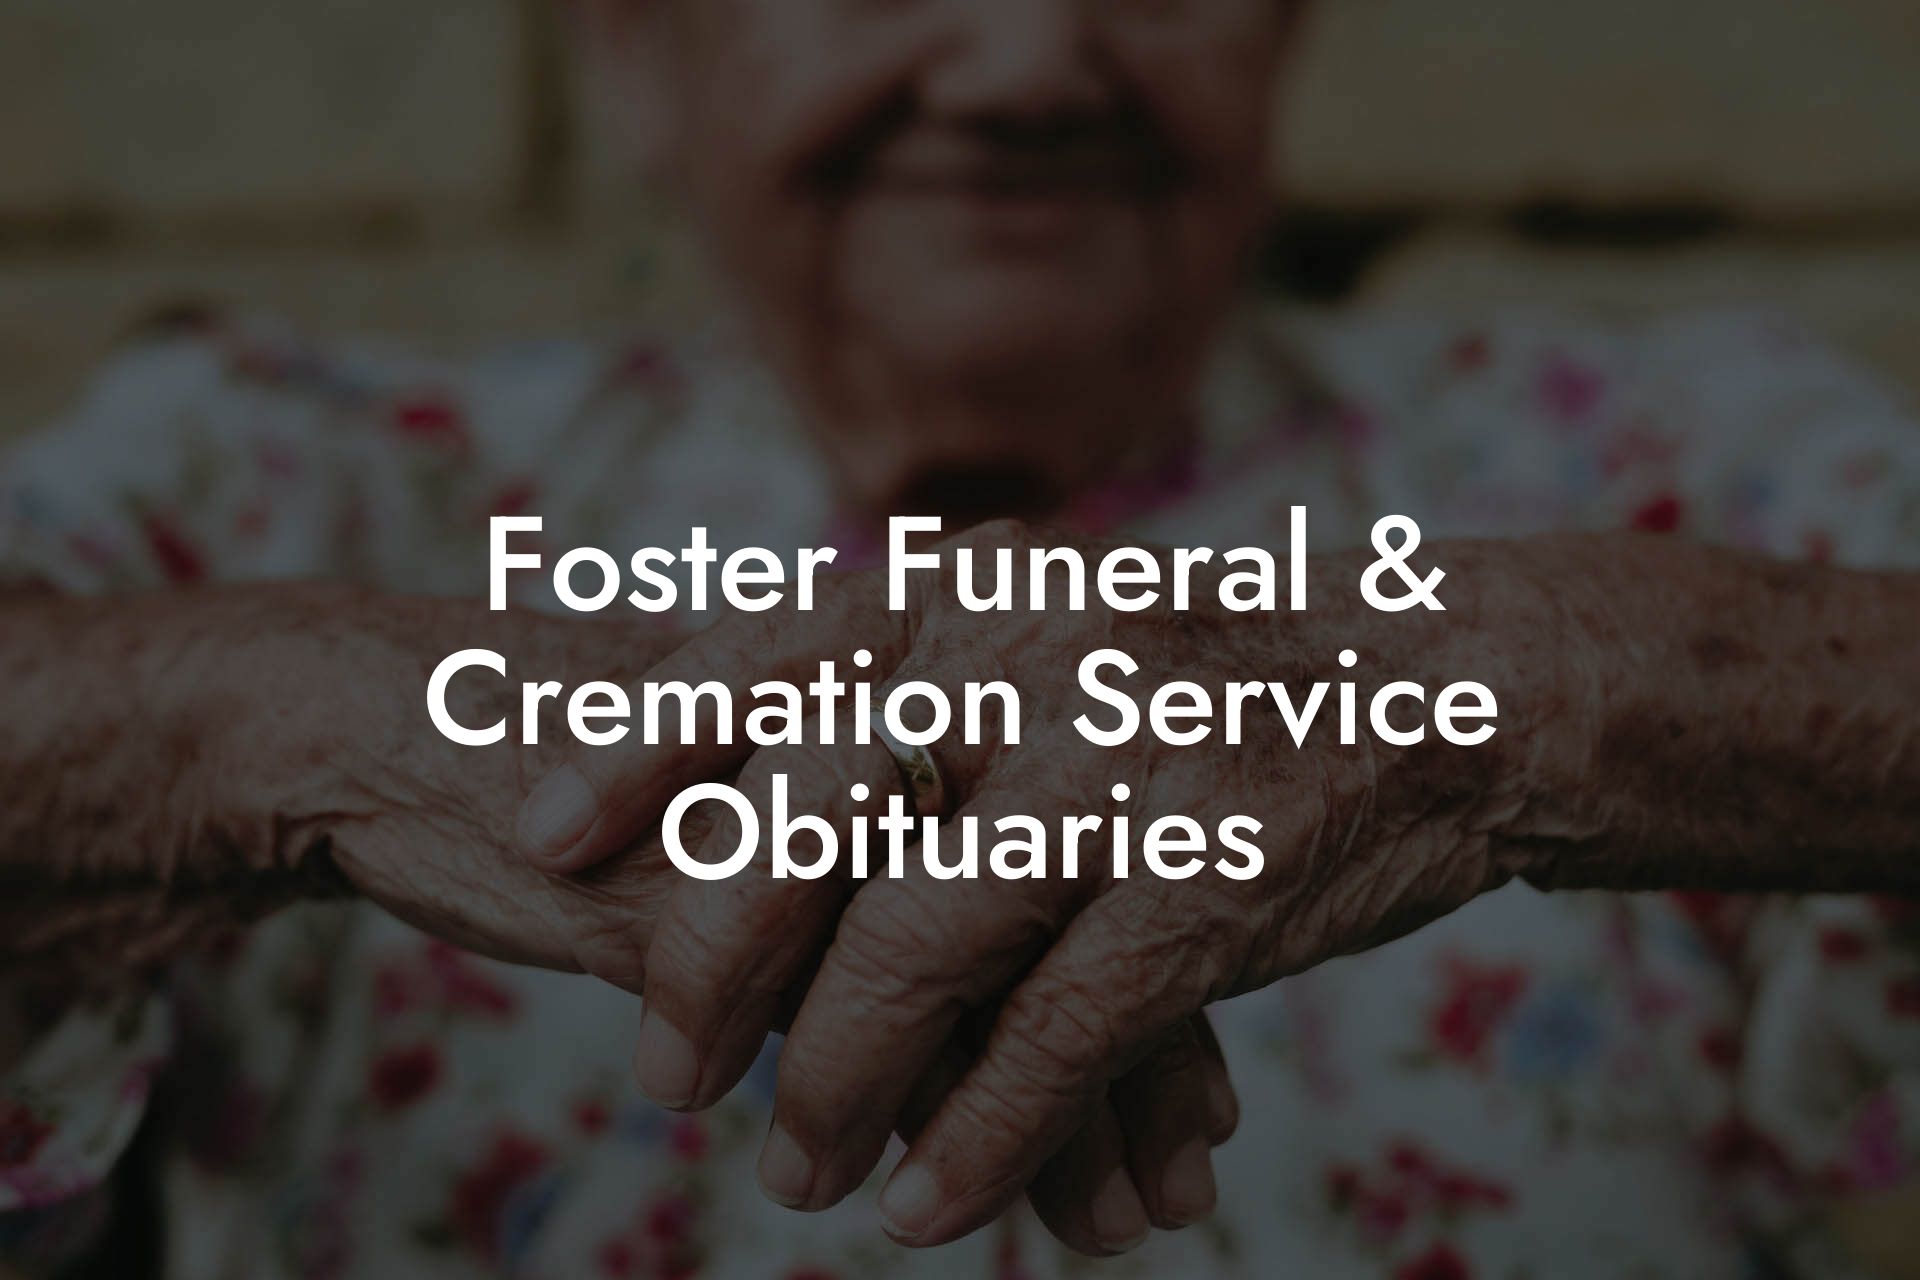 Foster Funeral & Cremation Service Obituaries